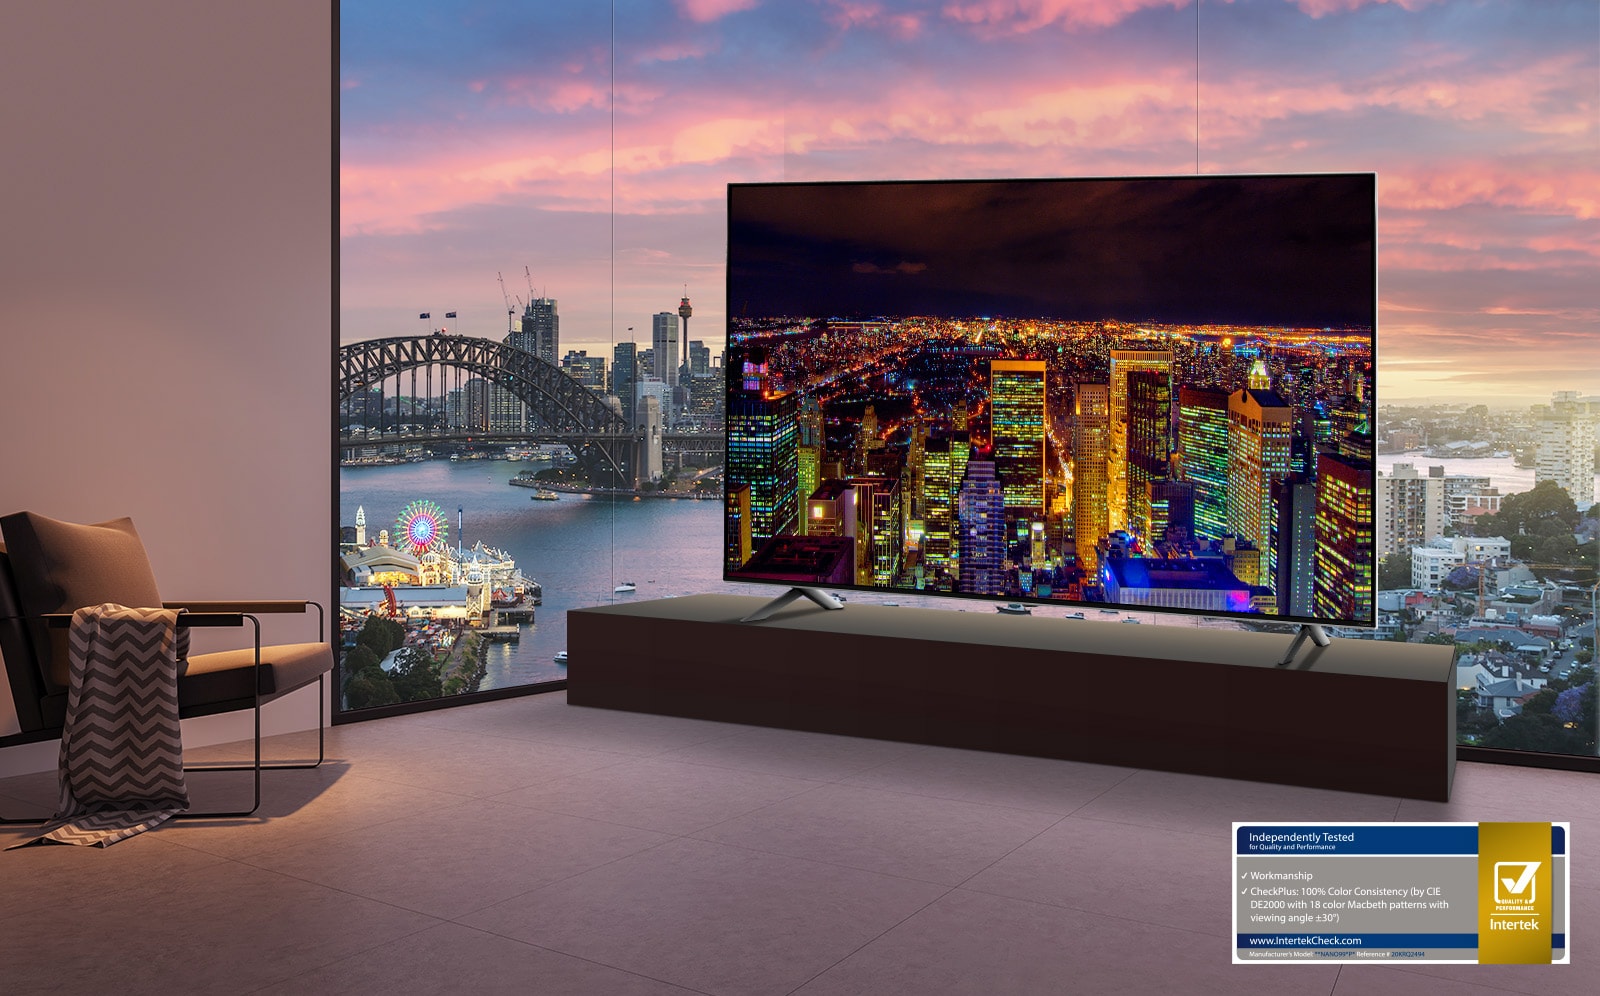 Room overlooking a river and cityscape. A TV is installed in front of the window showing a night view of a city skyline against a dark sky.